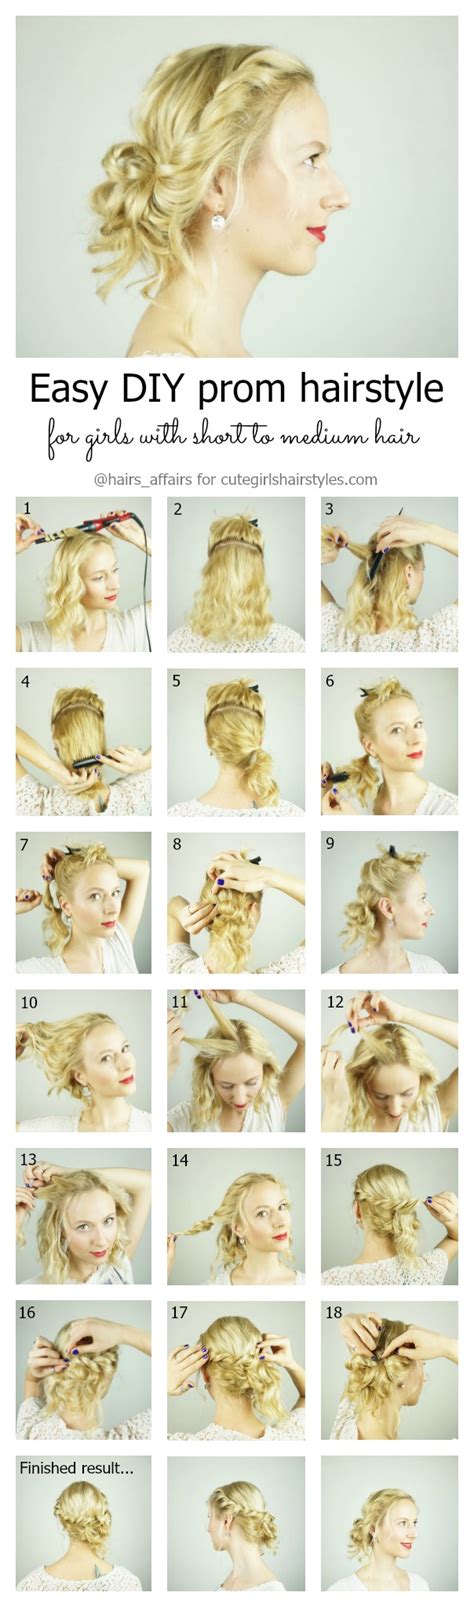 easy diy prom hairstyle for girls with short to medium hair with layers cute girls hairstyles